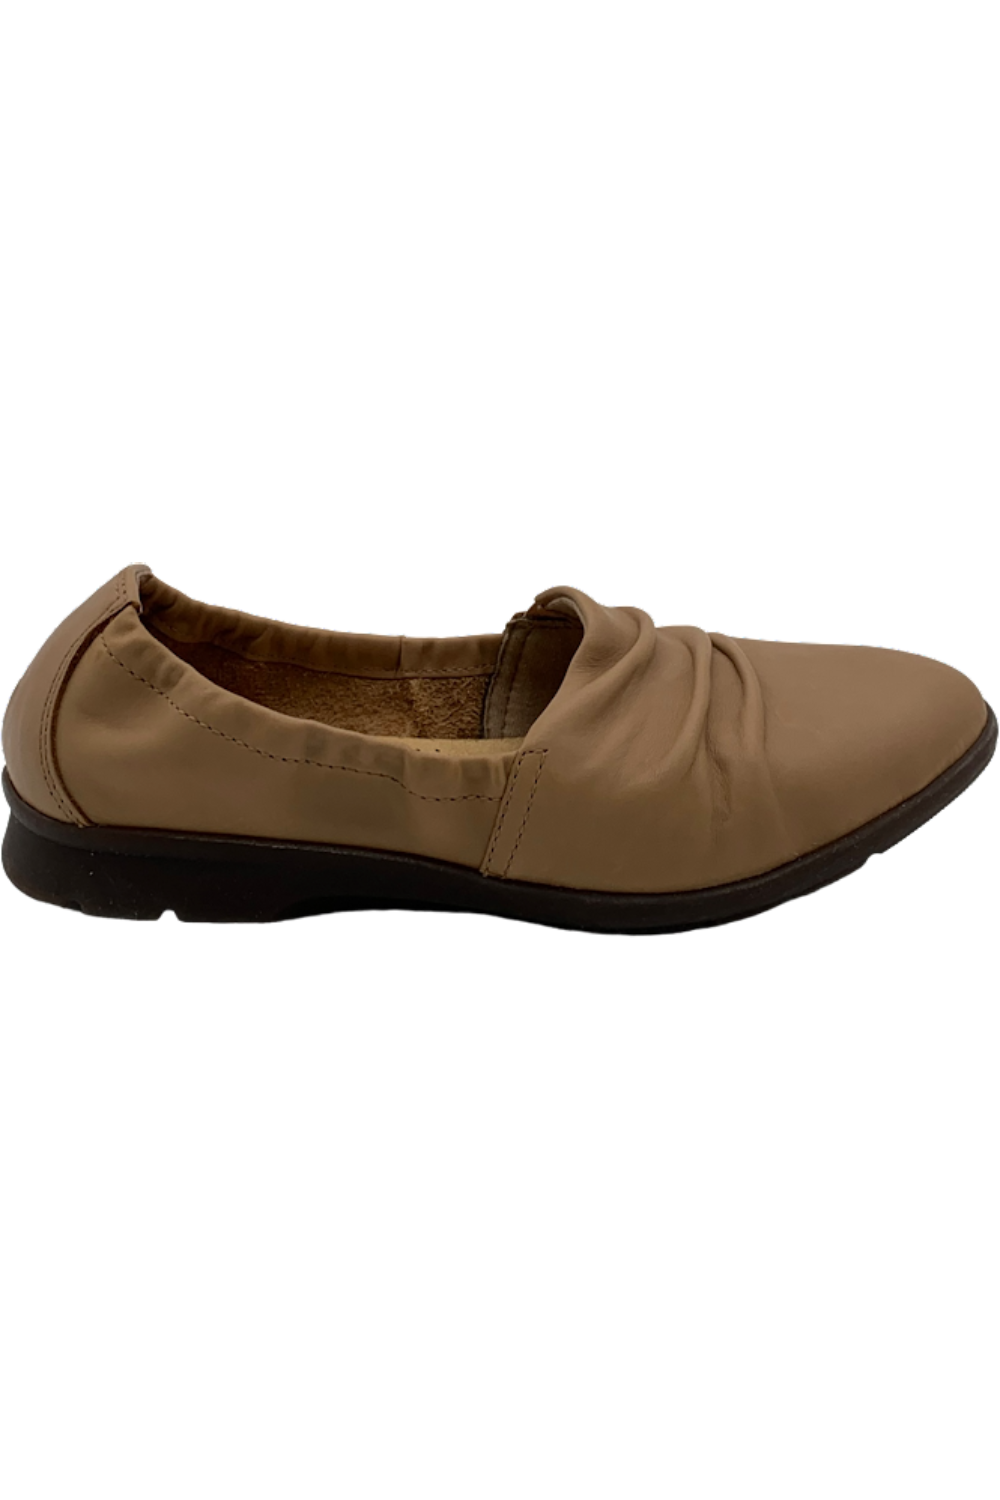 Clarks Collection Rouched Jenette Ruby Praline Leather | Jender